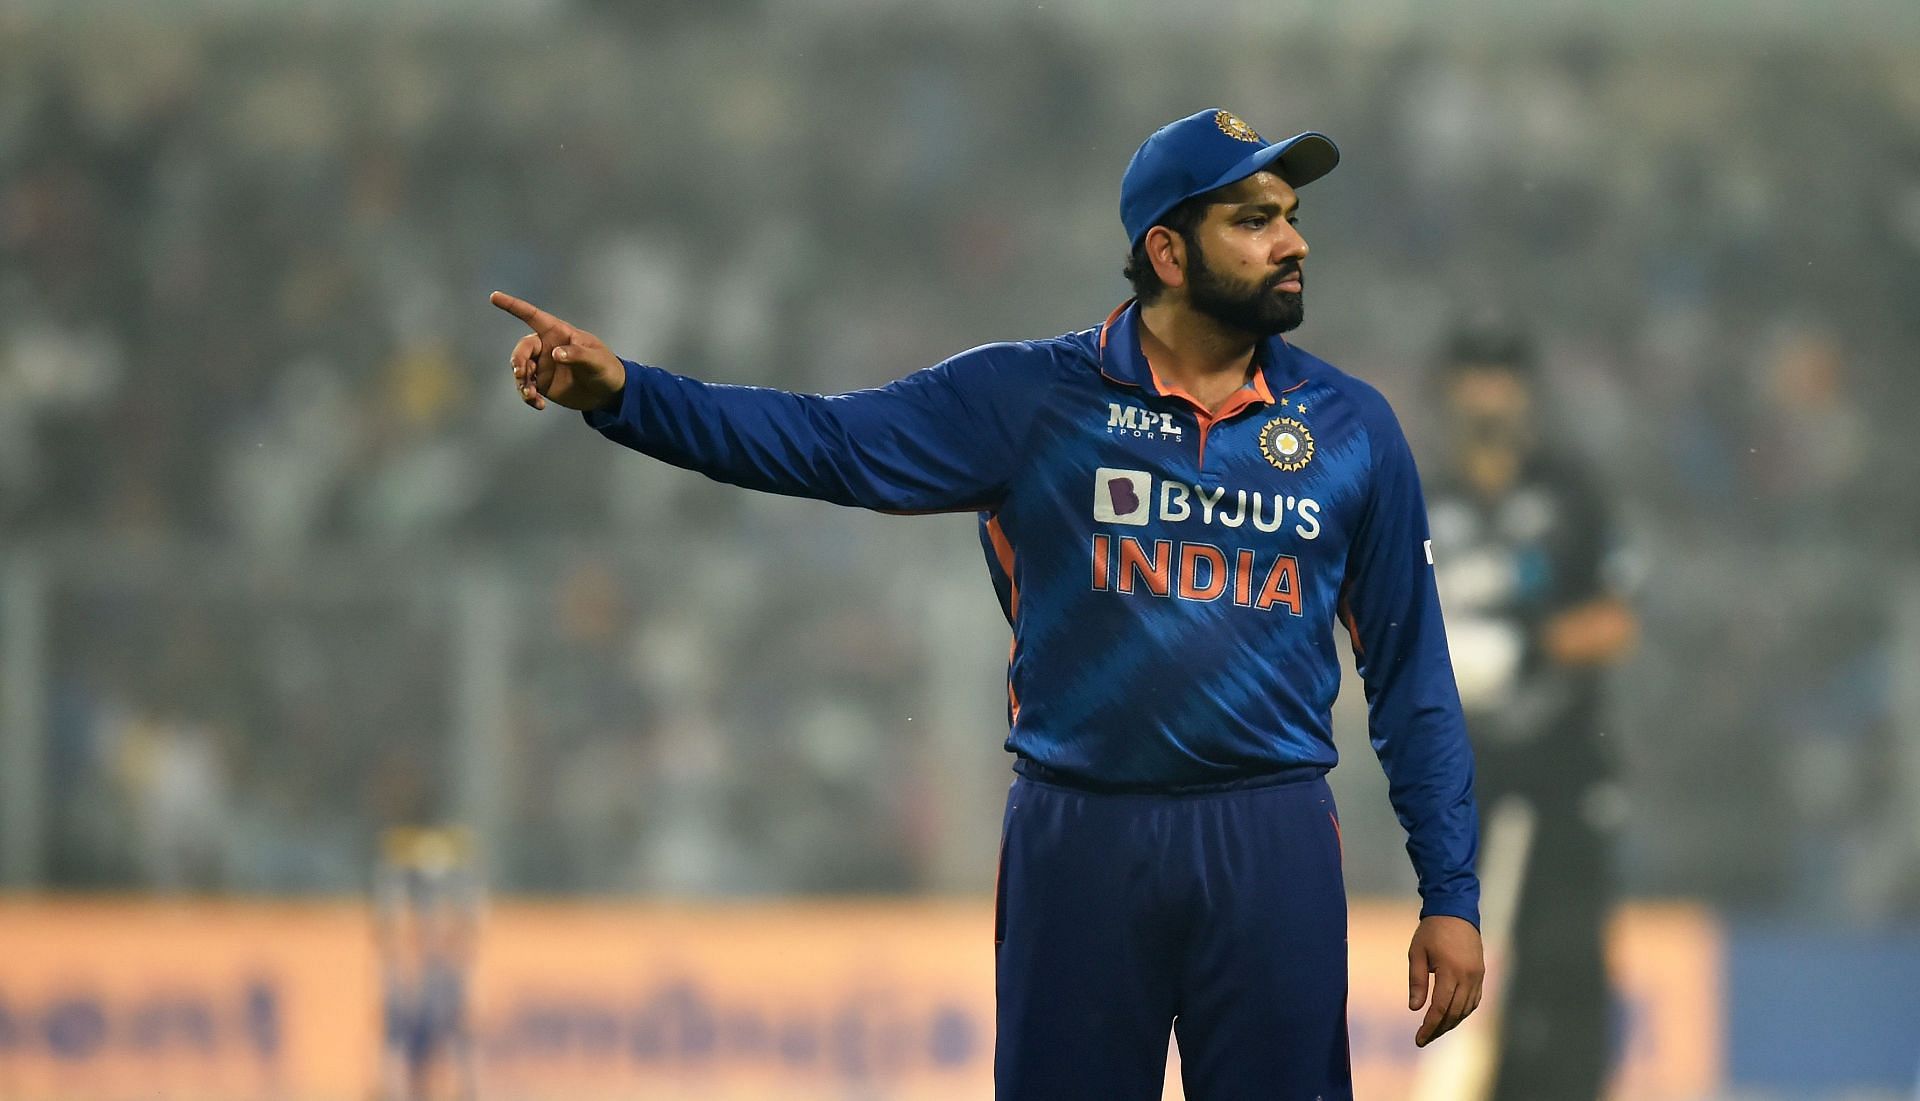 “The blame game starts when the team loses” – Rajkumar Sharma feels Rohit Sharma was fortunate to get two ‘slightly easier’ series as skipper